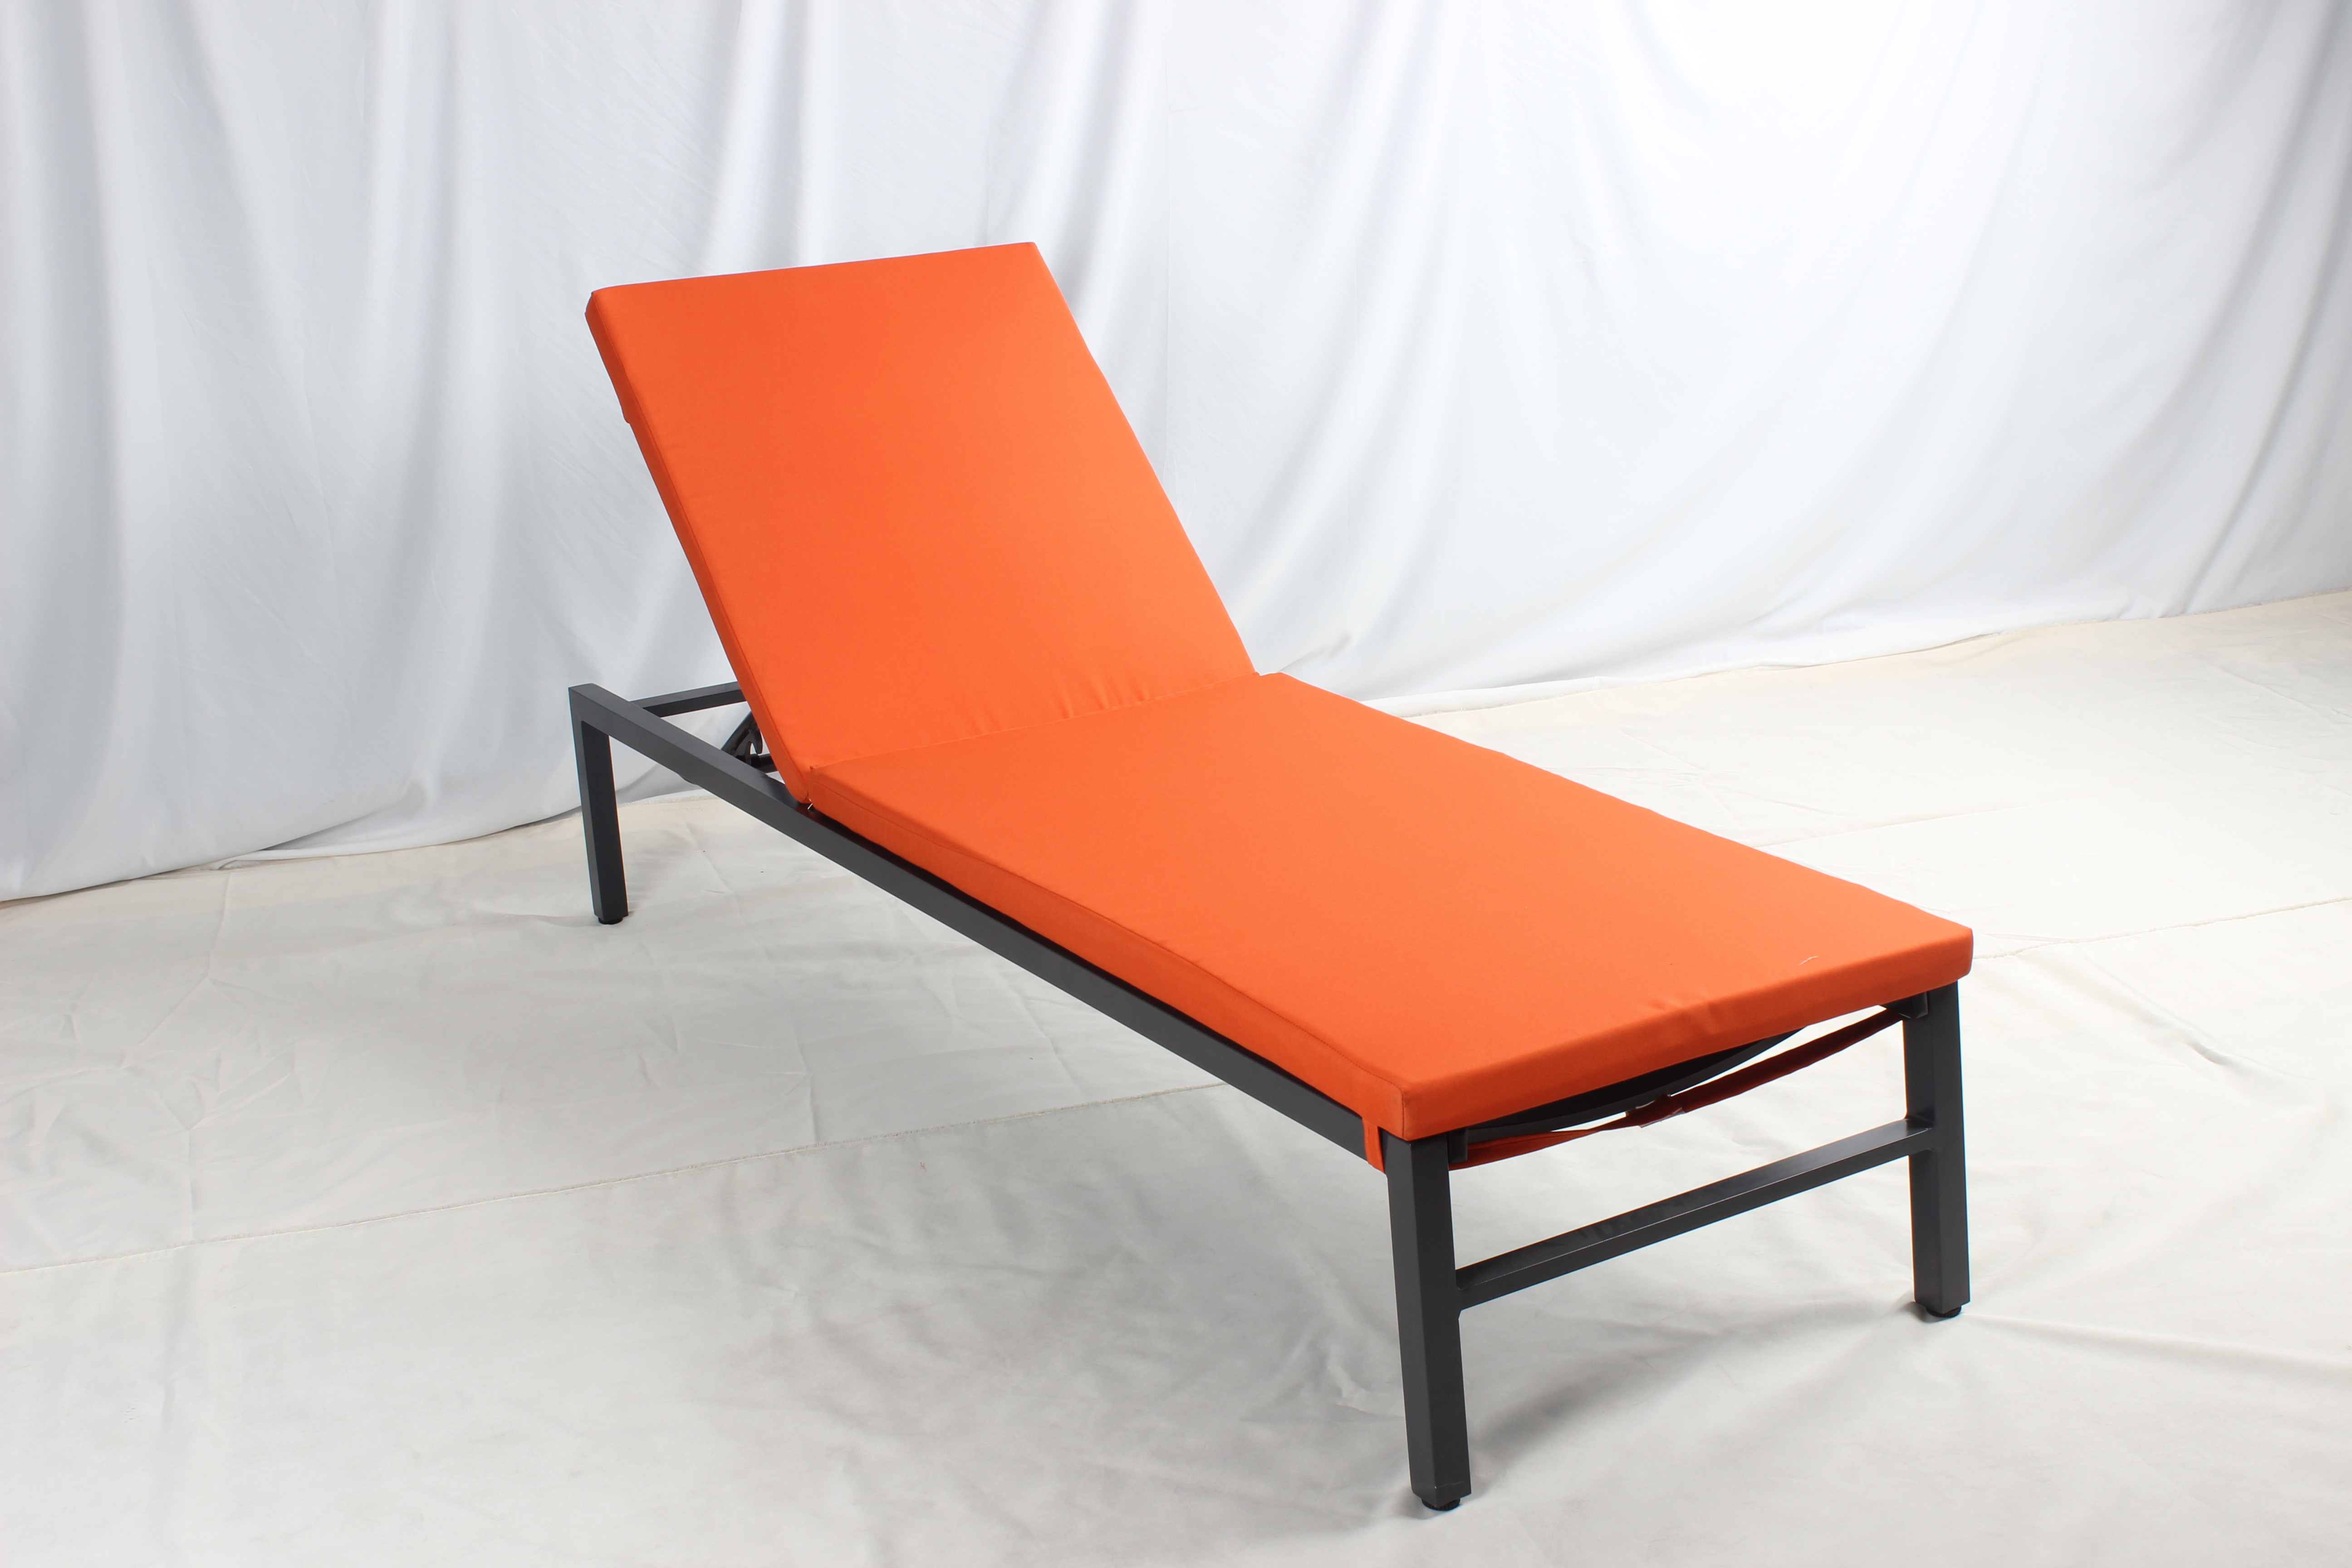 Patio aluminum chaise lounge chair with cushion